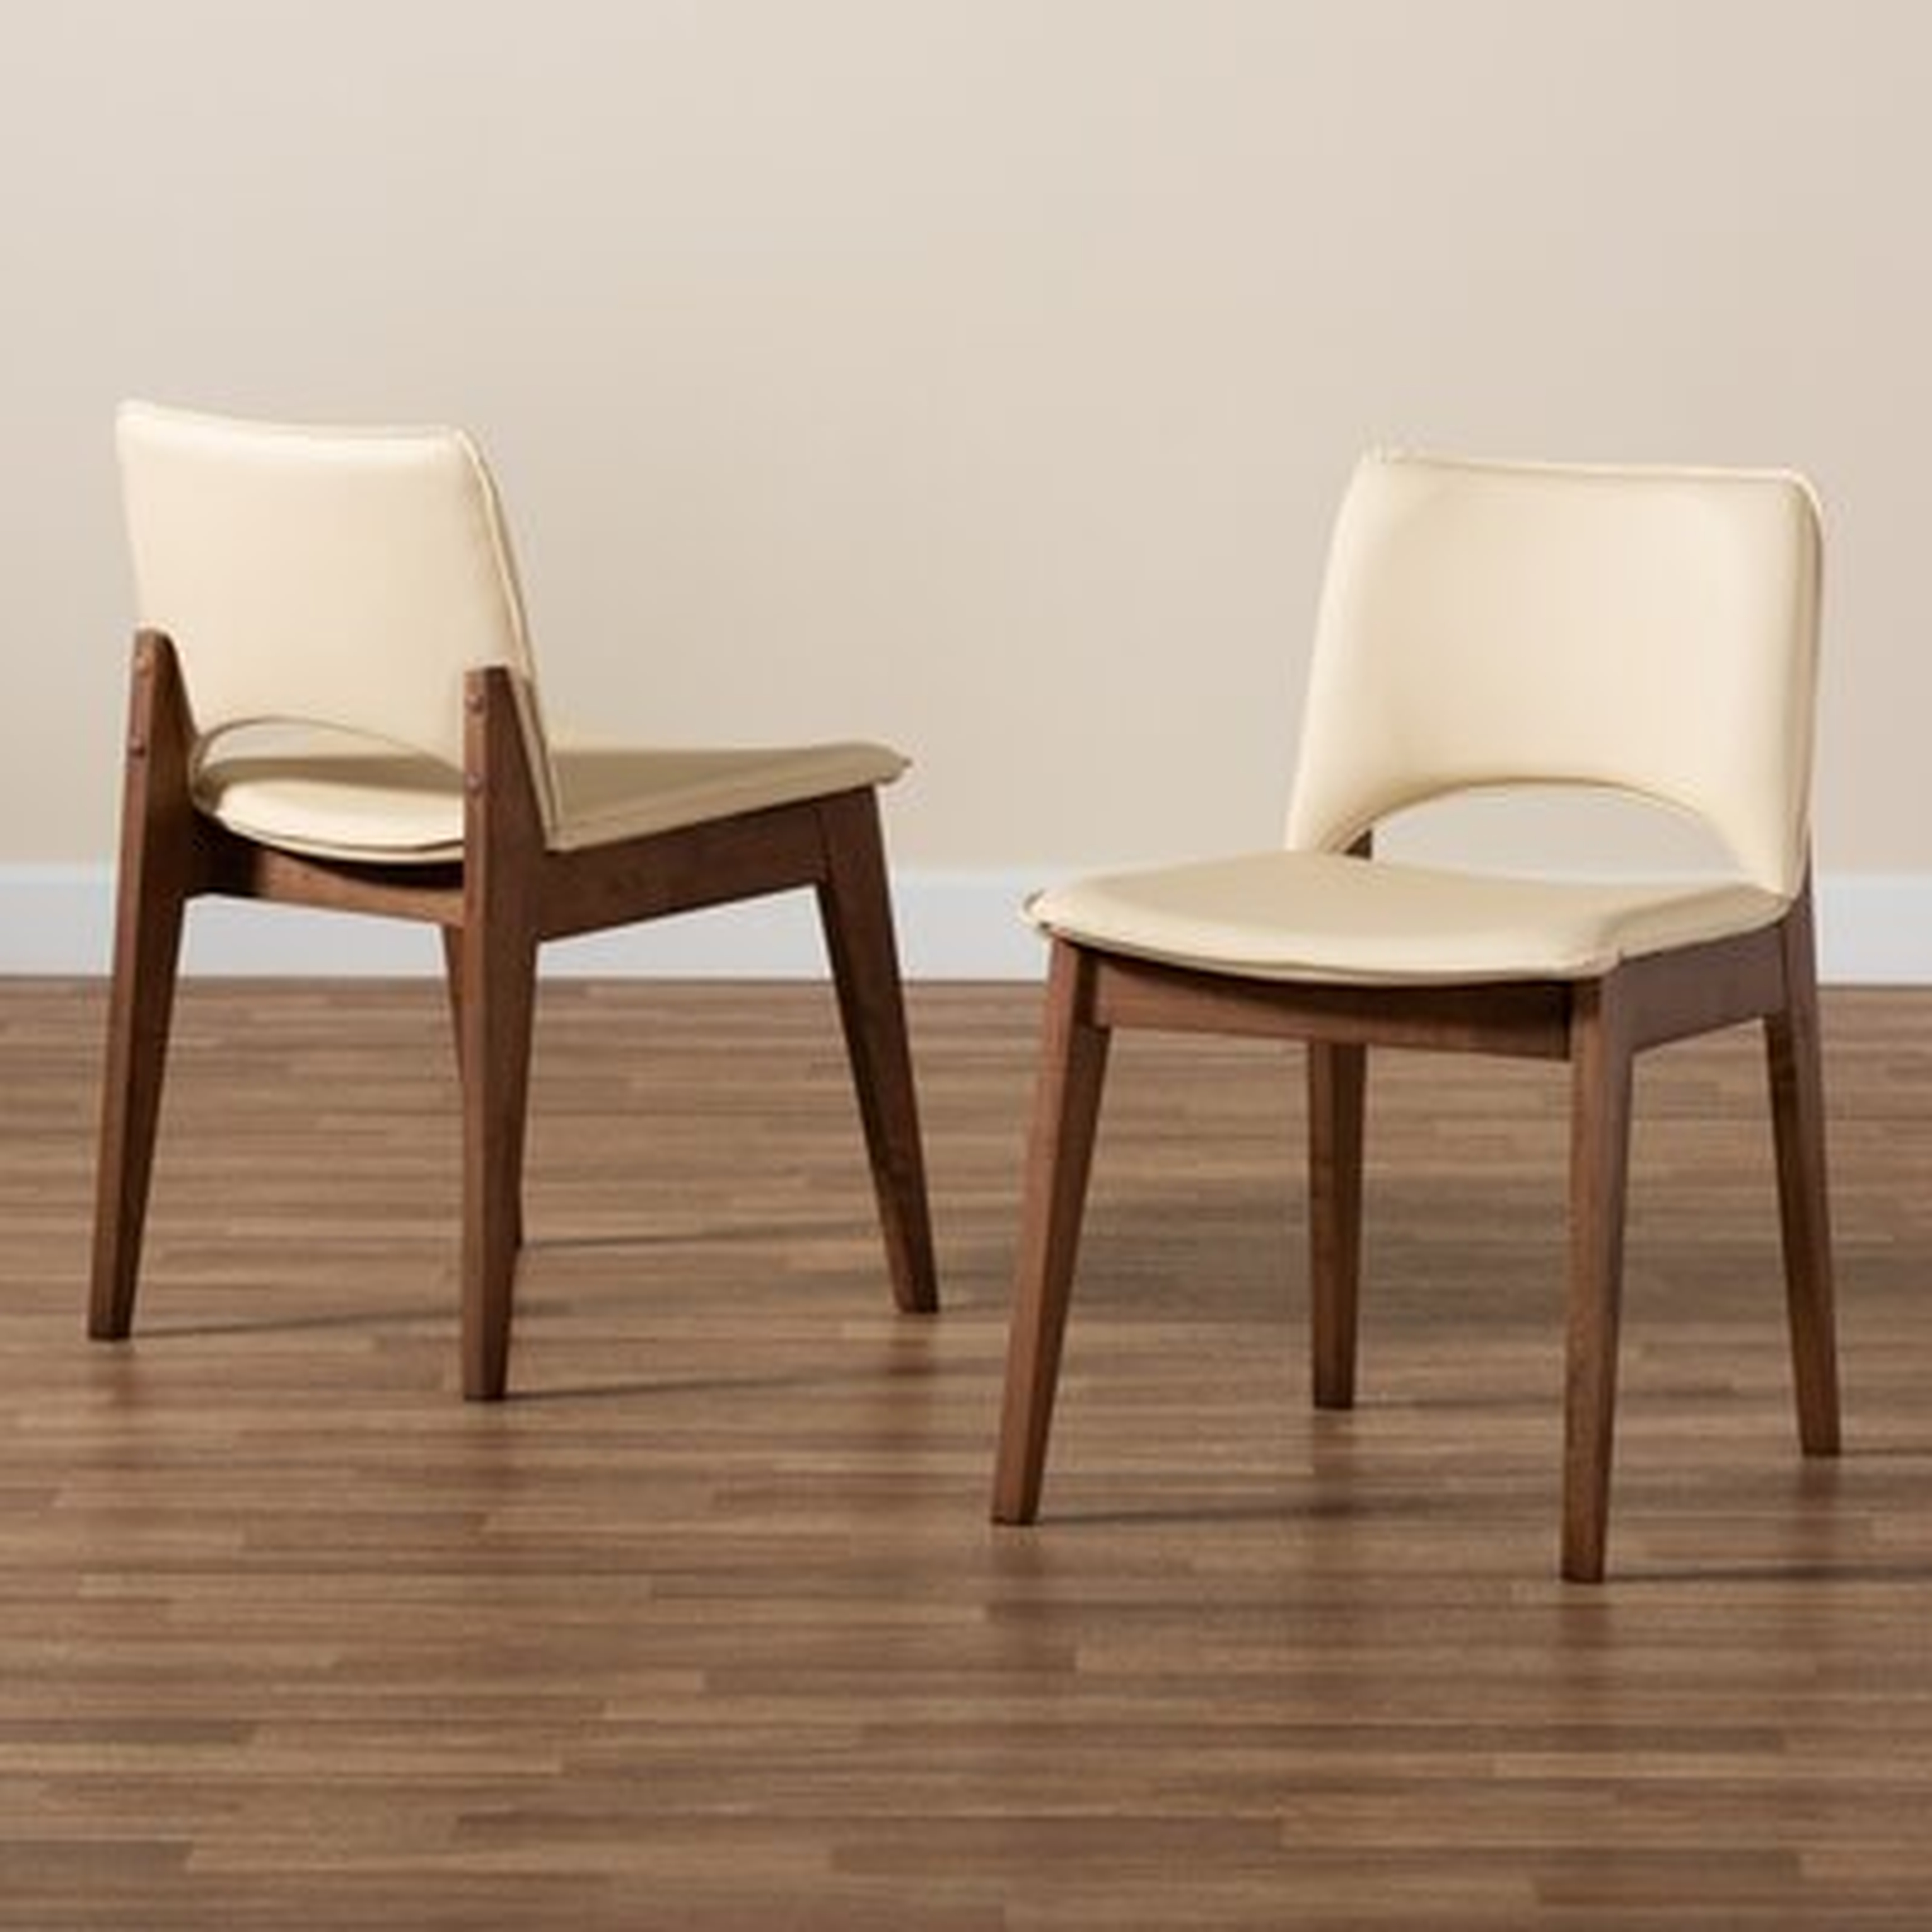 Afton Mid-Century Modern Brown Faux Leather Upholstered And Walnut Brown Finished Wood 2-Piece Dining Chair Set - Wayfair